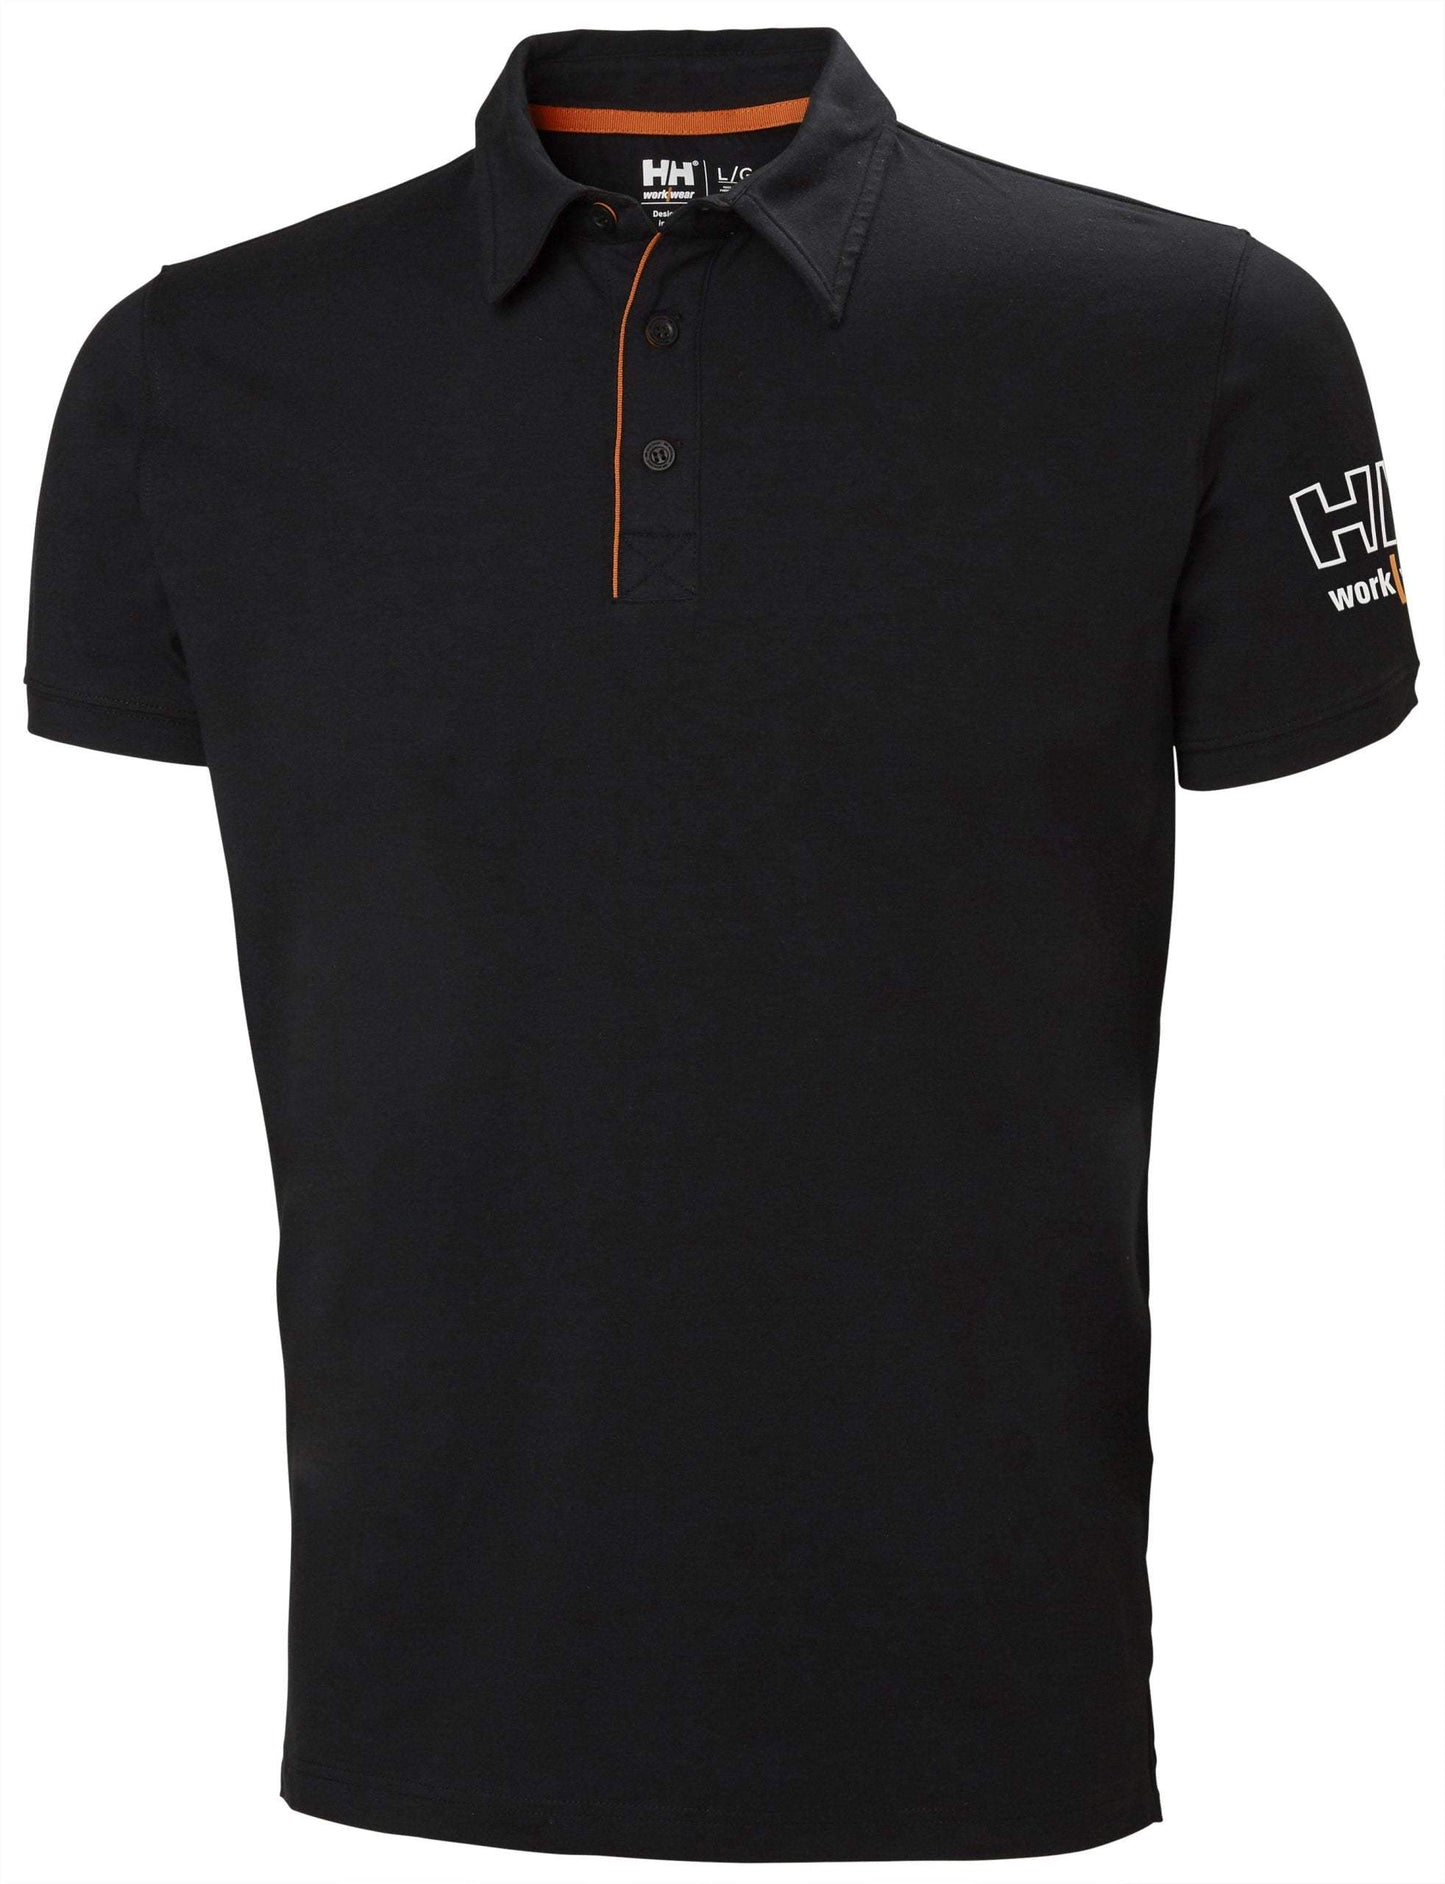 Helly Hansen Men's Kensington Polo - The Luxury Promotional Gifts Company Limited